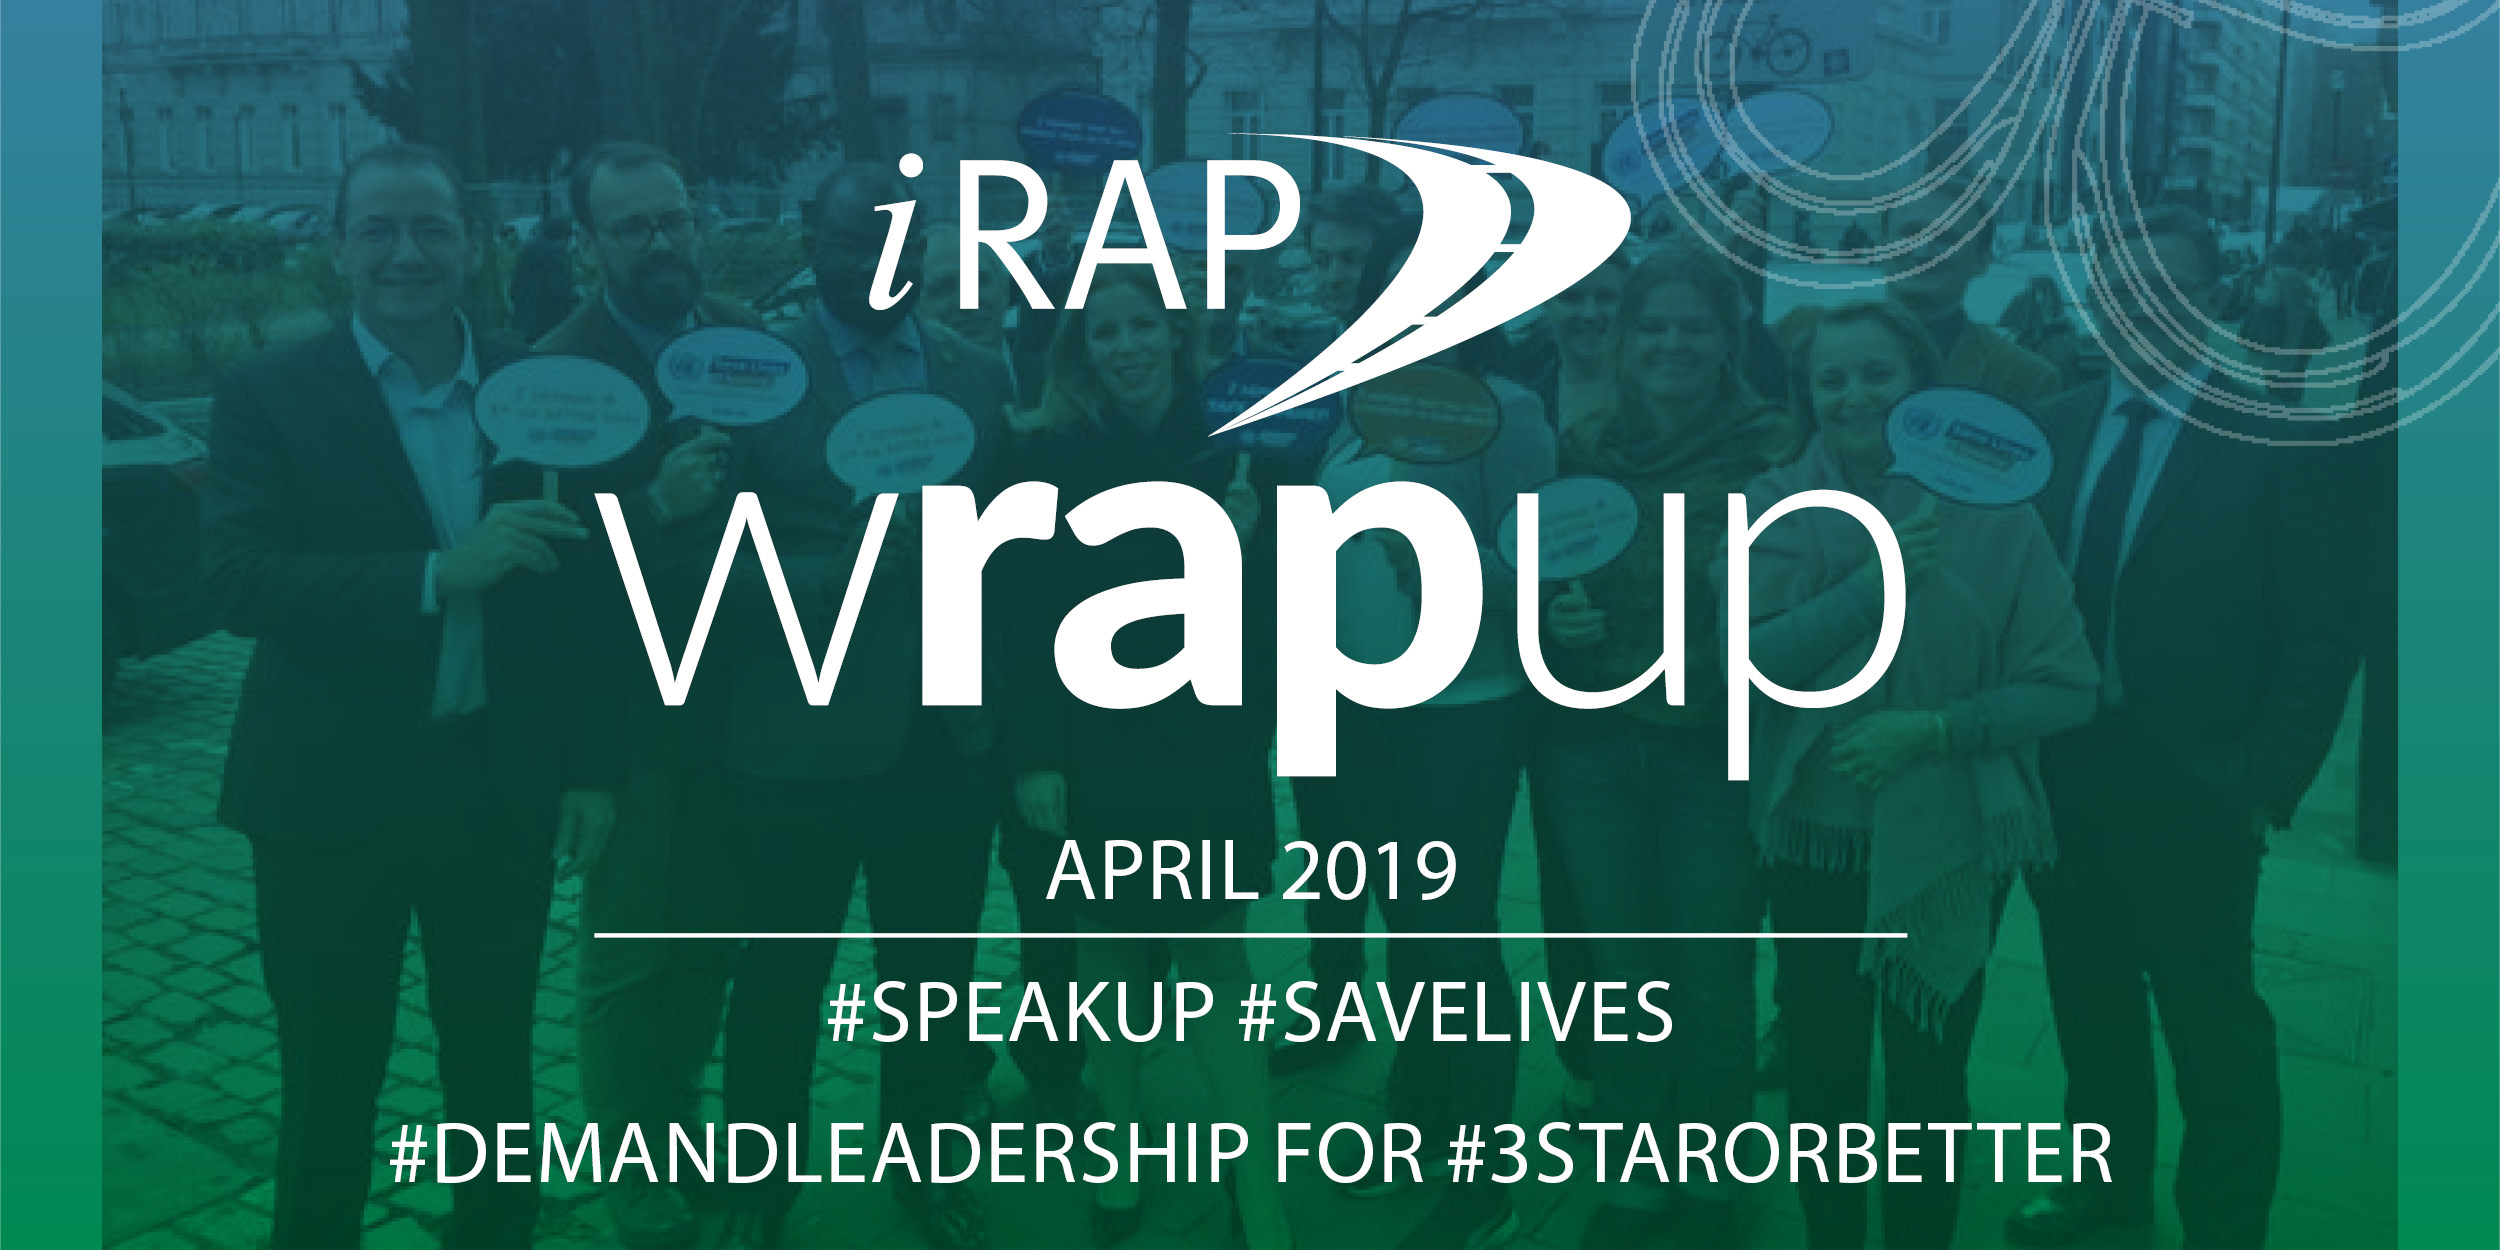 Latest WrapUp E-newsletter now available (April 2019 Edition): #Demandleadership for #3StarorBetter